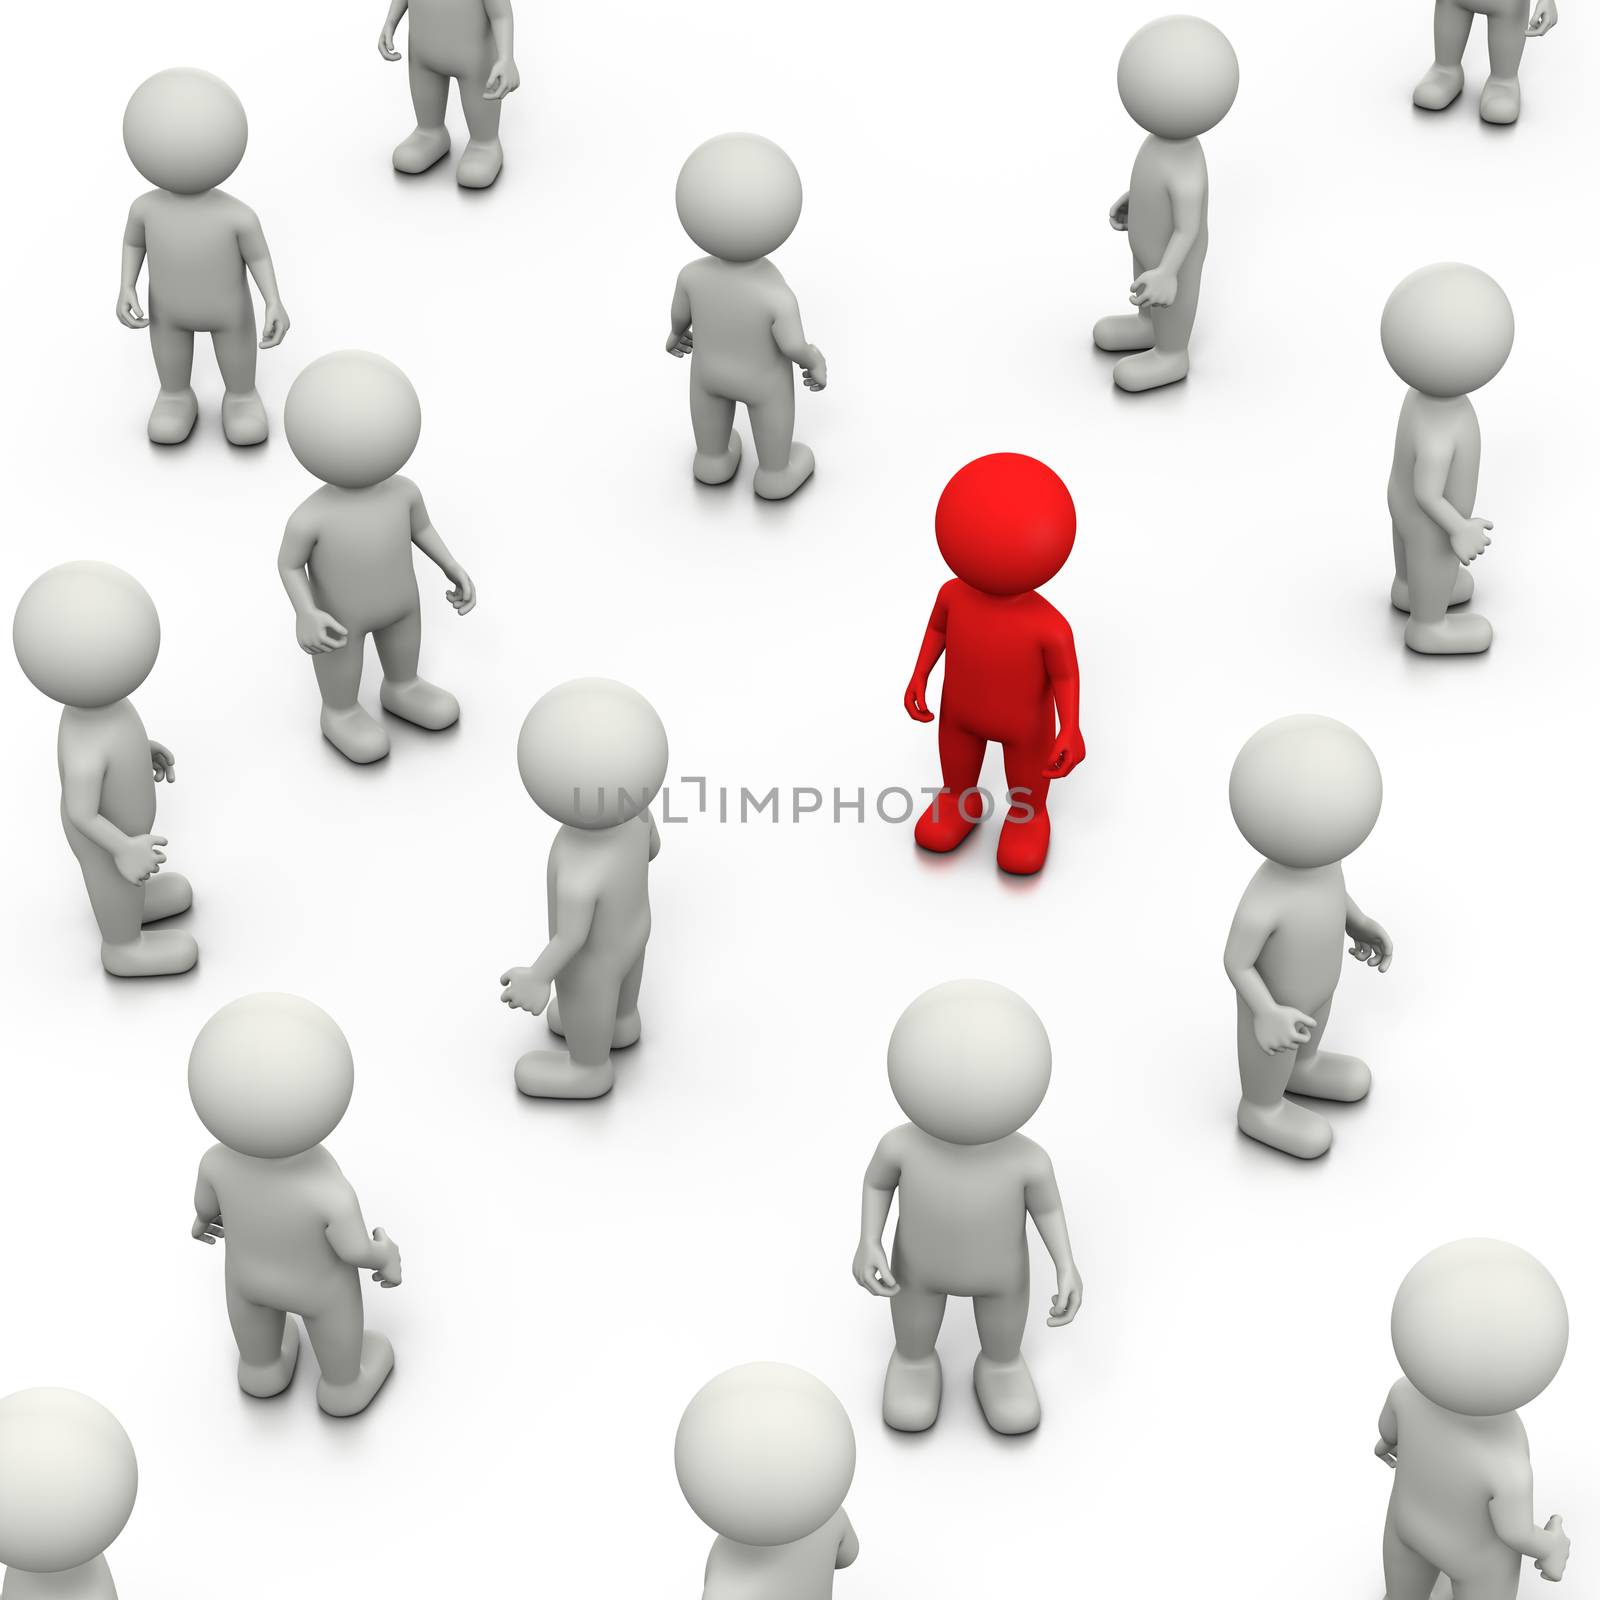 Red 3D Character Stand Out in a Crowd of White, 3D Illustration on White Background